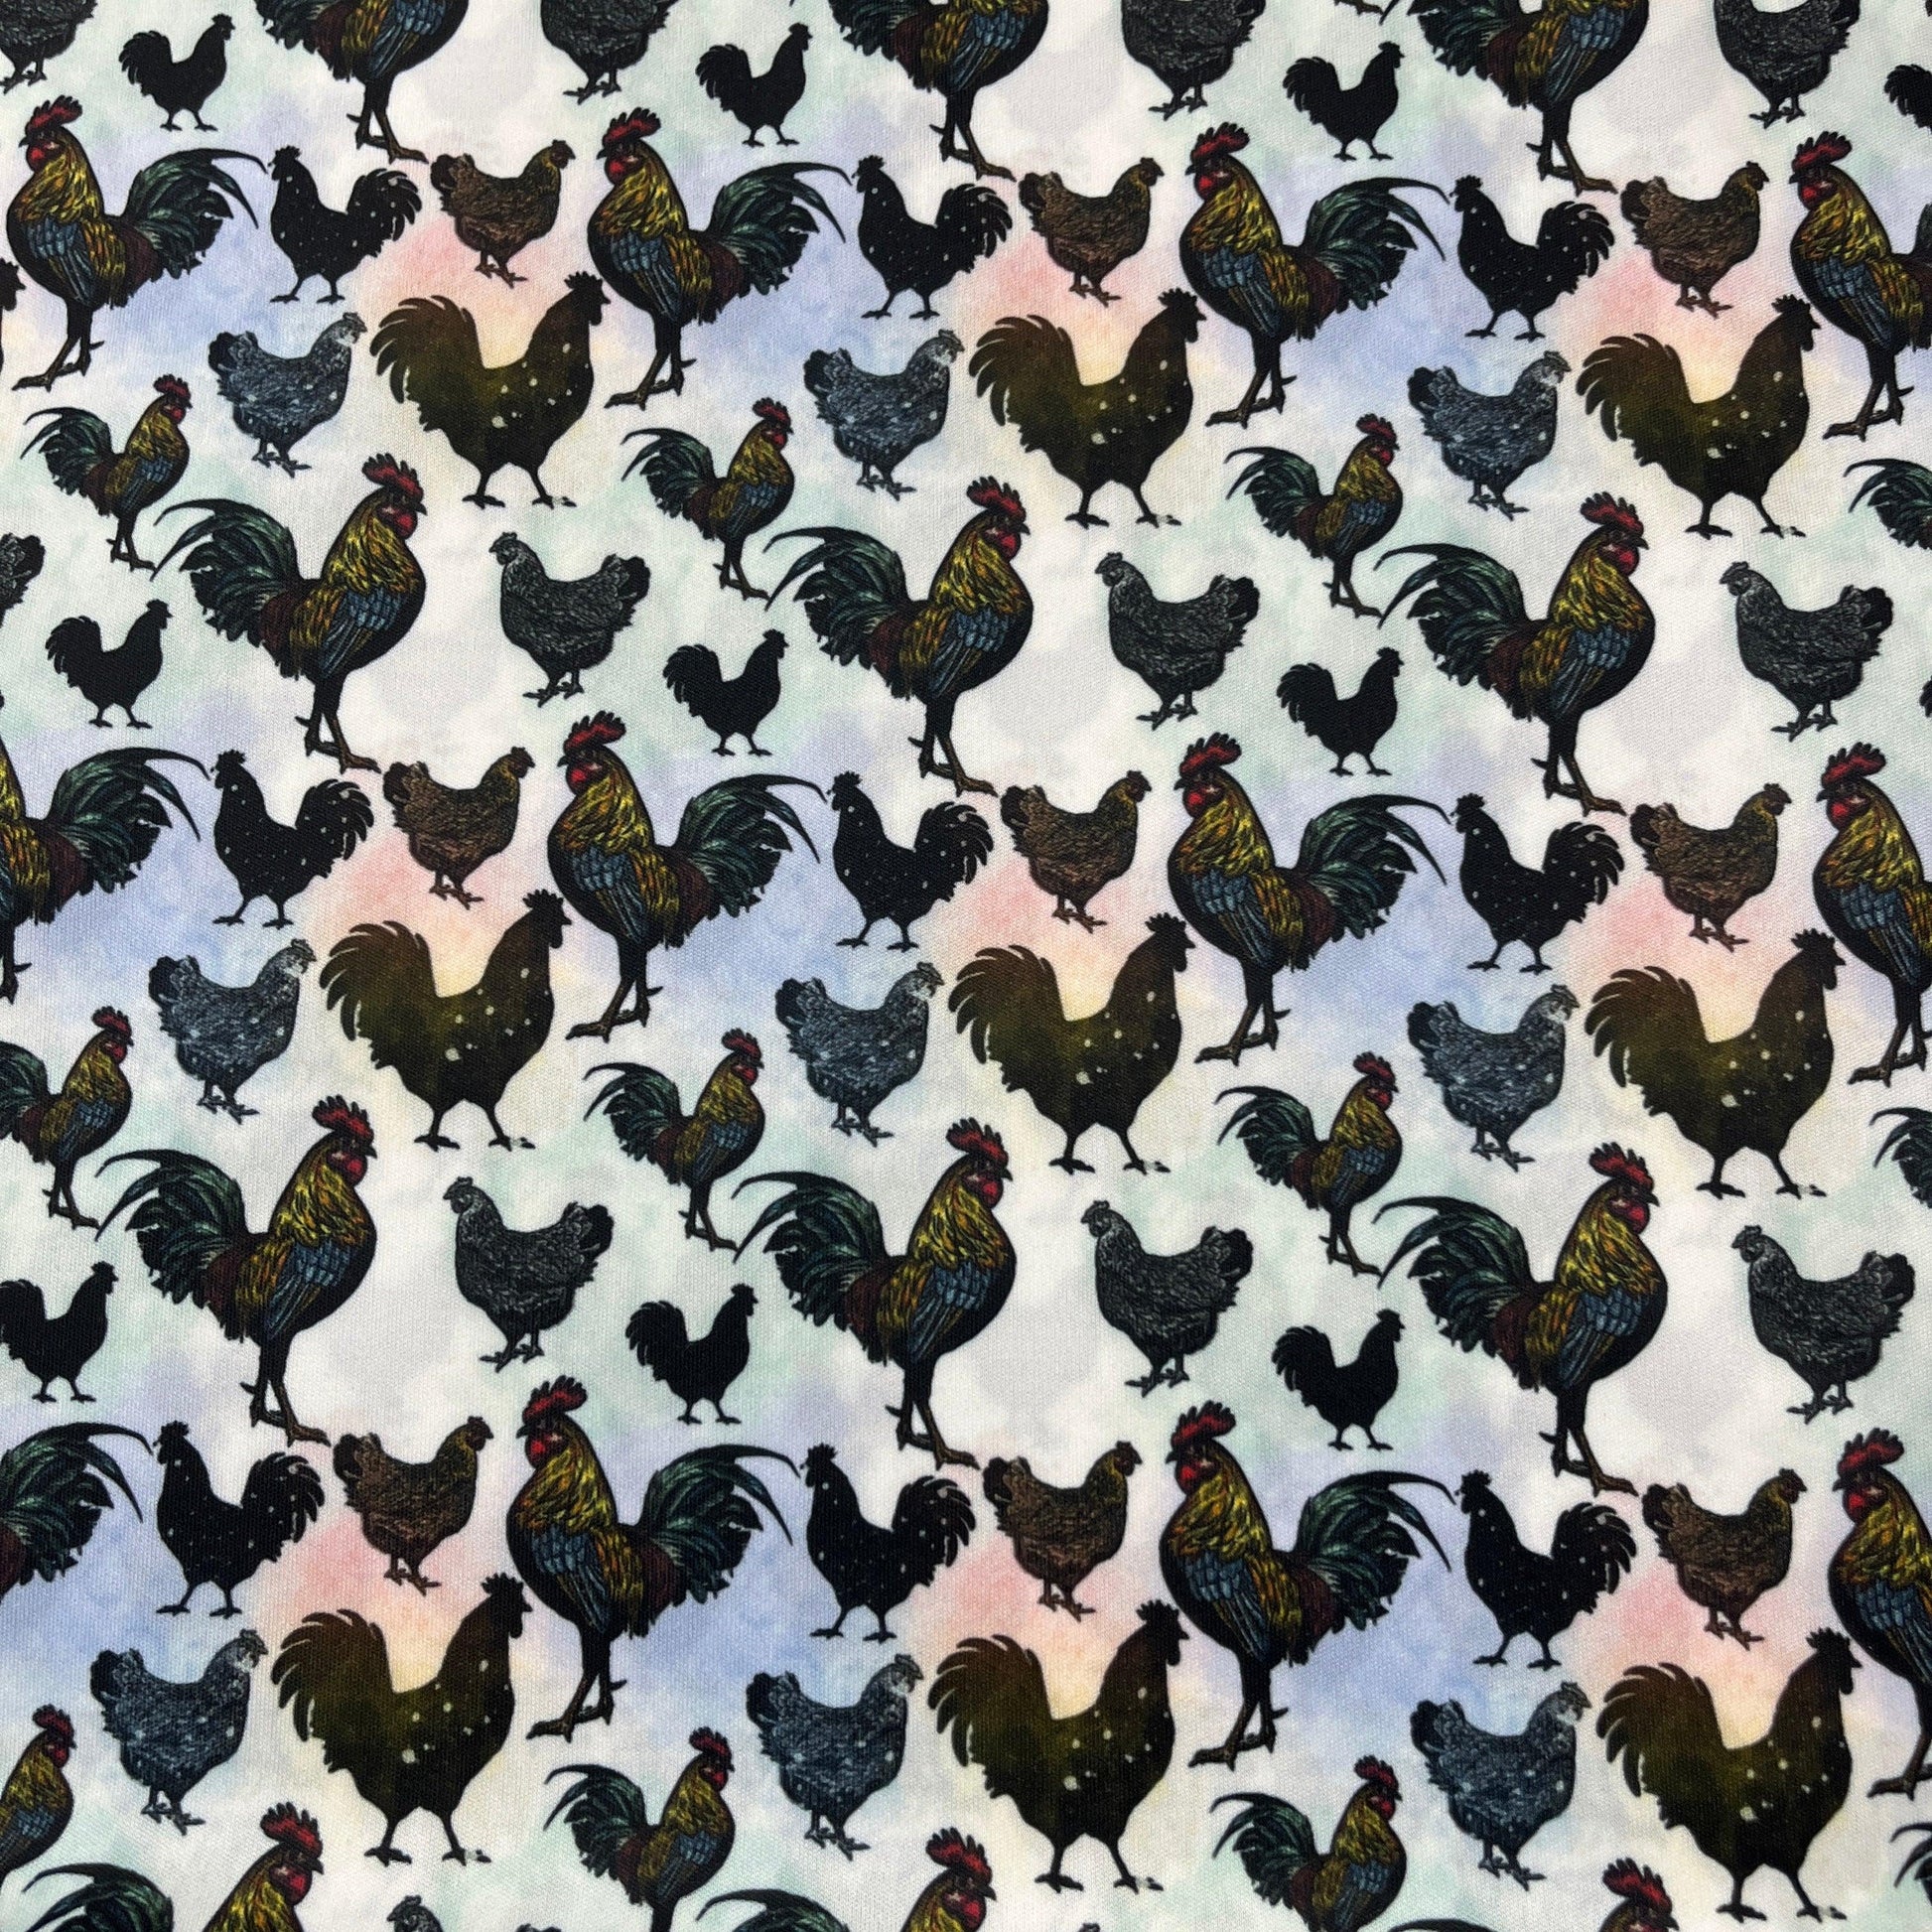 Proud Rooster 1 mil PUL Fabric - Made in the USA - Nature's Fabrics